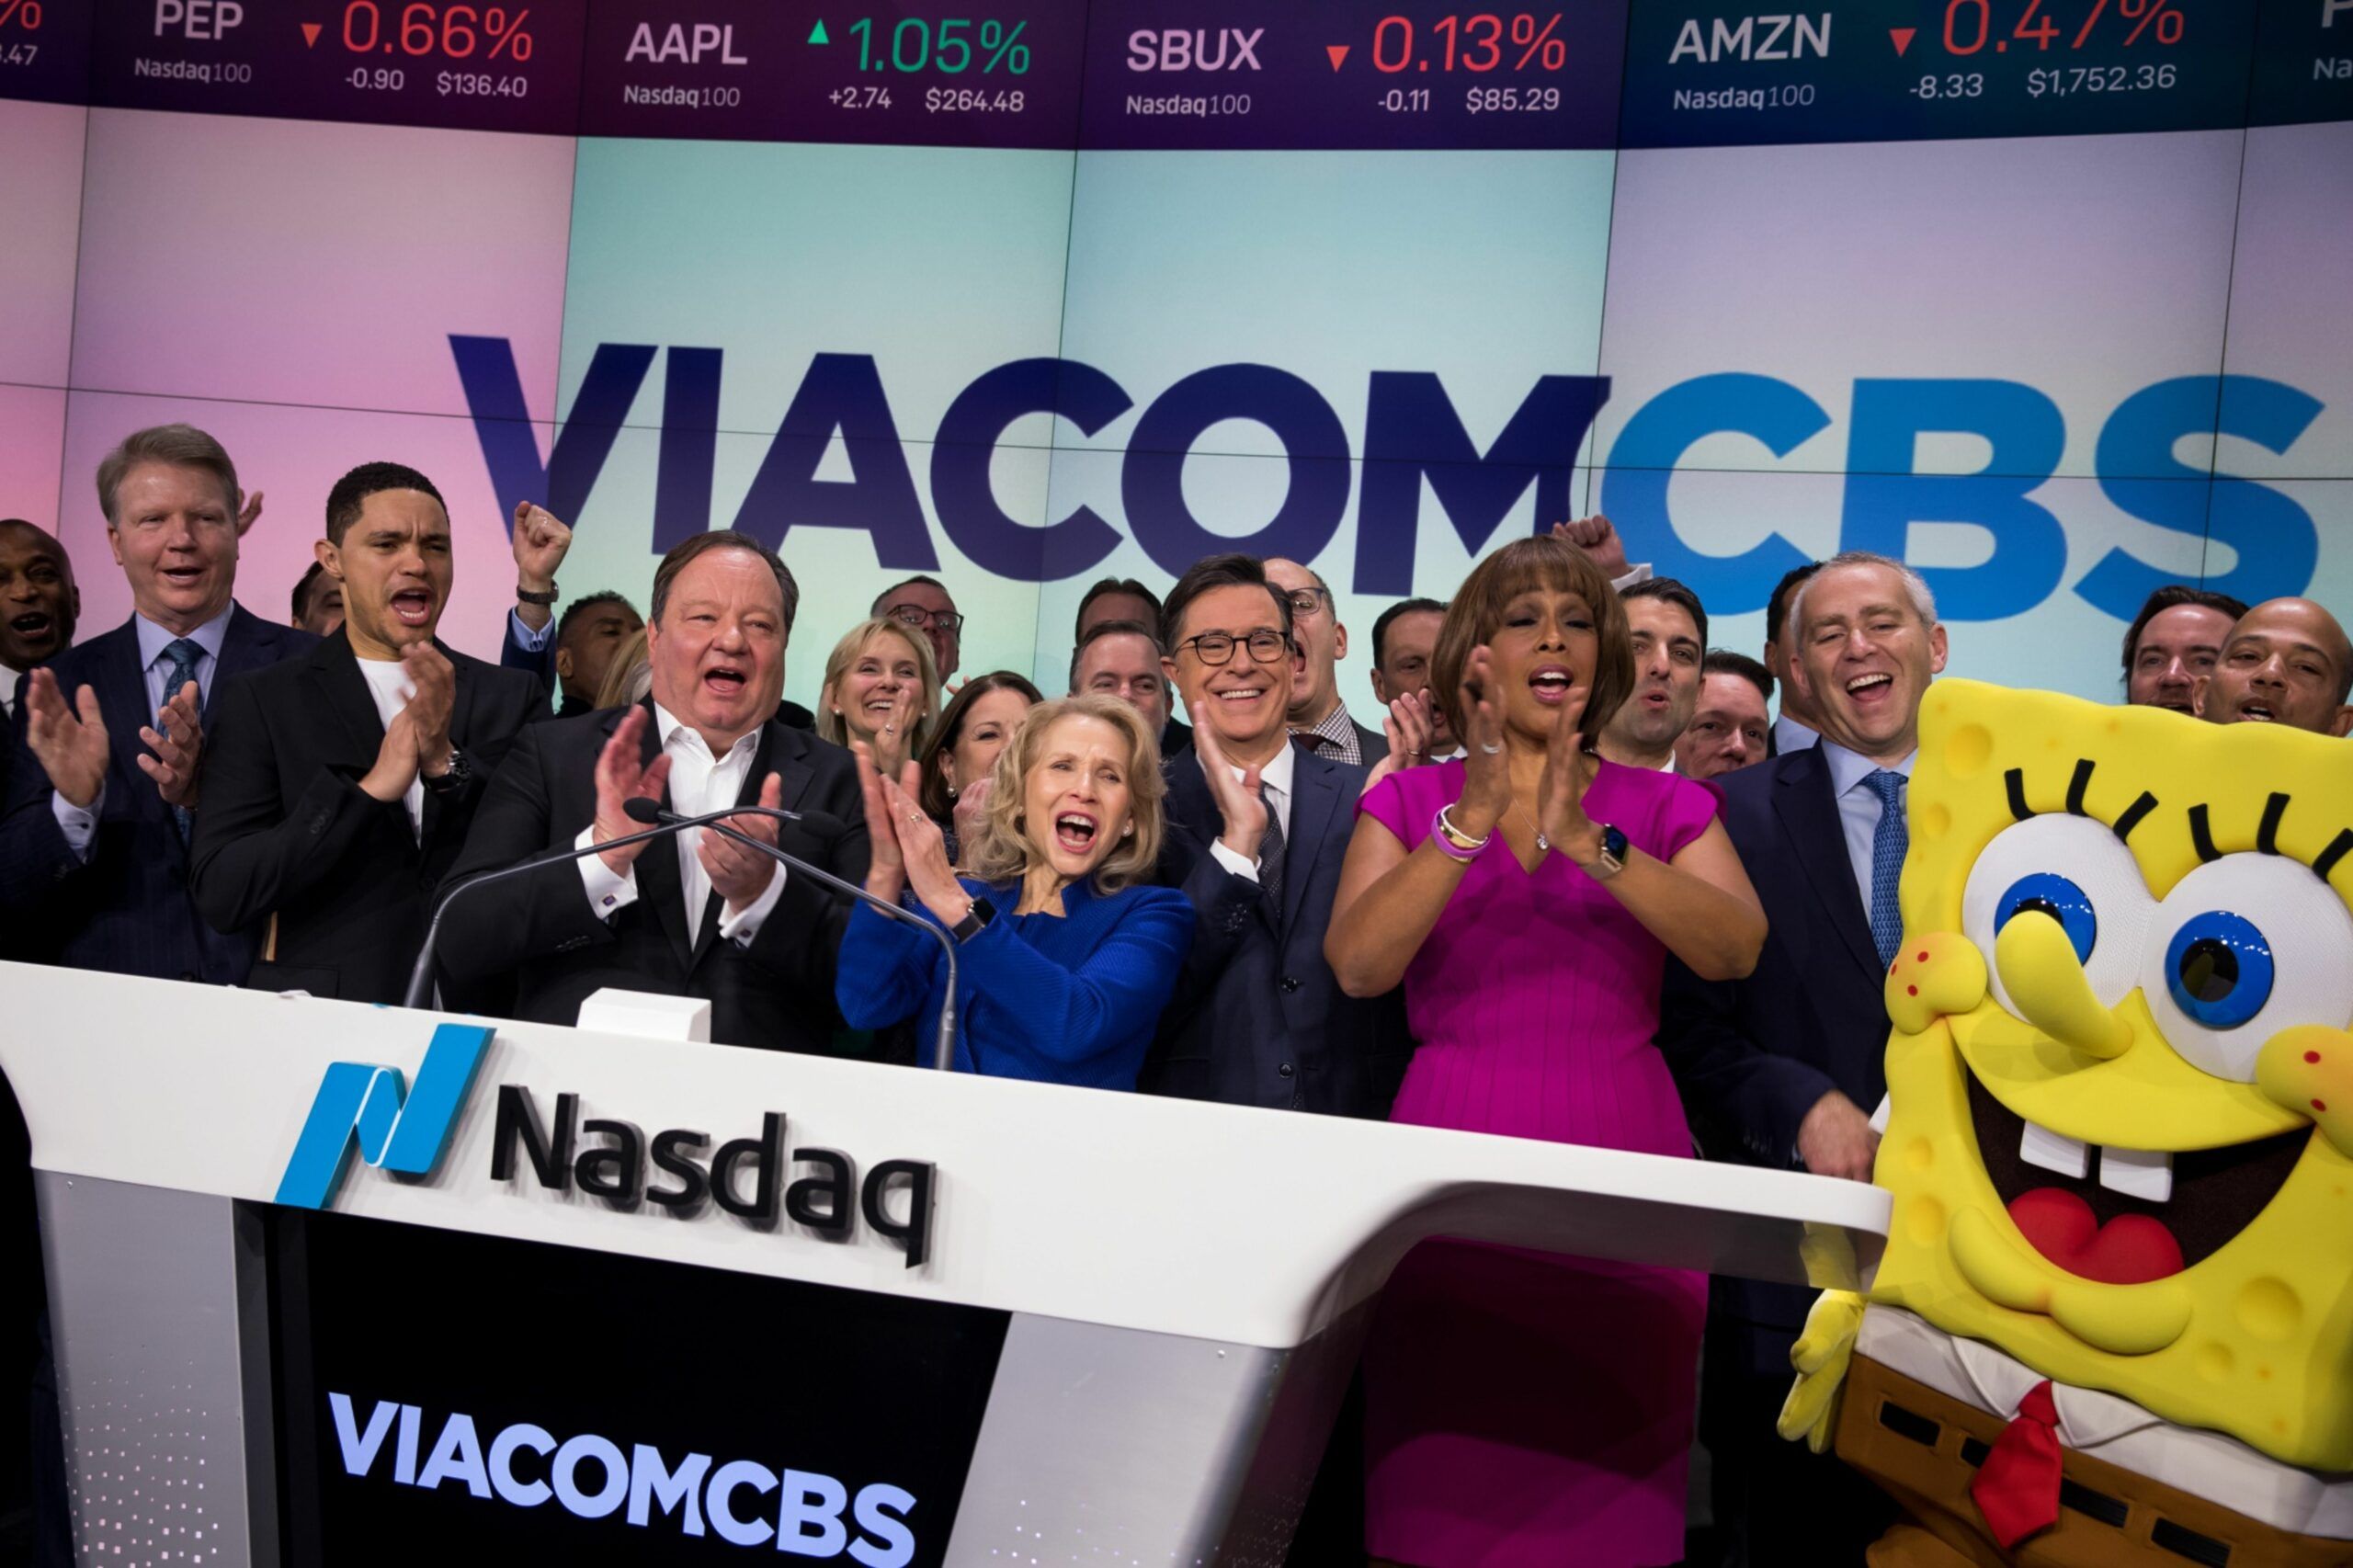 Bob Bakish, president and chief executive officer of ViacomCBS Inc., center left, and Shari Redstone, chair of VicaomCBS Inc., applaud during the opening bell in celebration of the company's merger at the Nasdaq MarketSite in New York, U.S. Viacom Inc. and CBS Corp. completed their merger on Wednesday, ending three years of on-and-off talks and creating what they boast is an entertainment colossus without peer. Photographer: Michael Nagle/Bloomberg